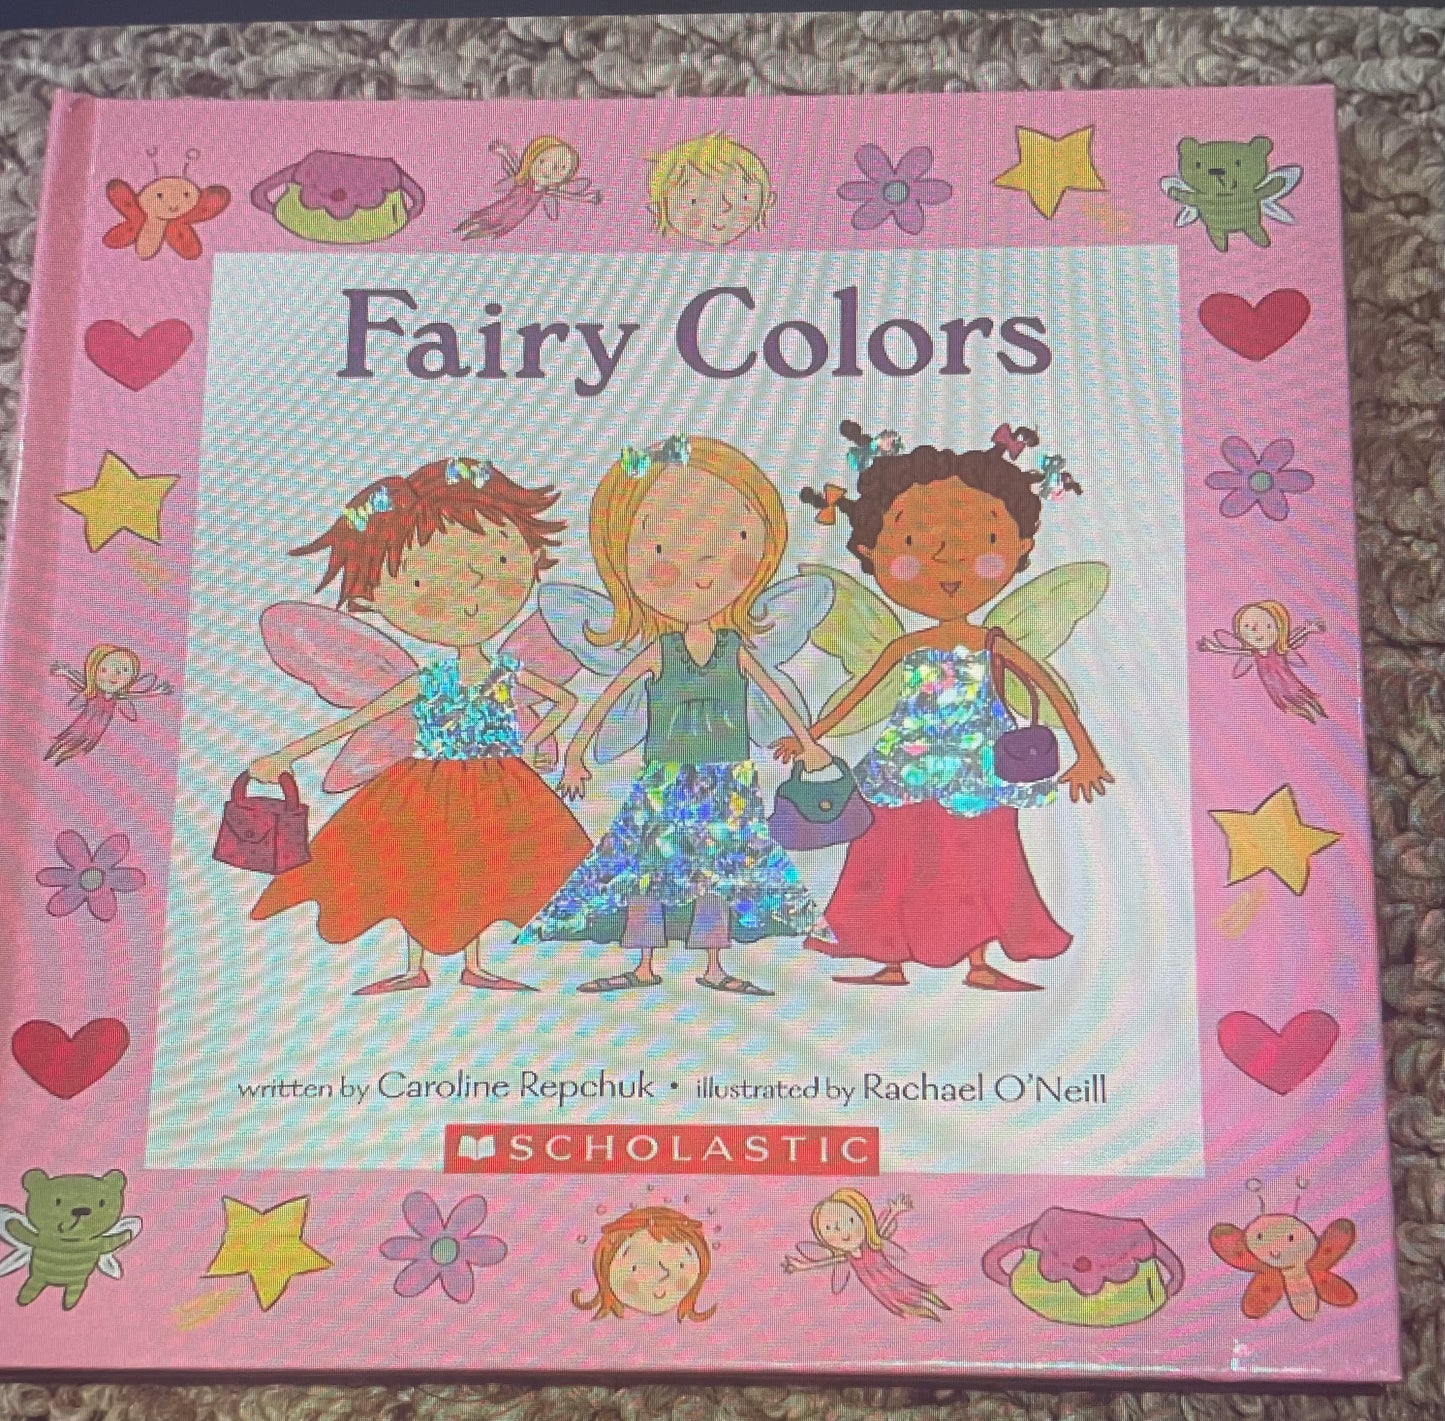 Books - A You’re Adorable & Fairy Colors